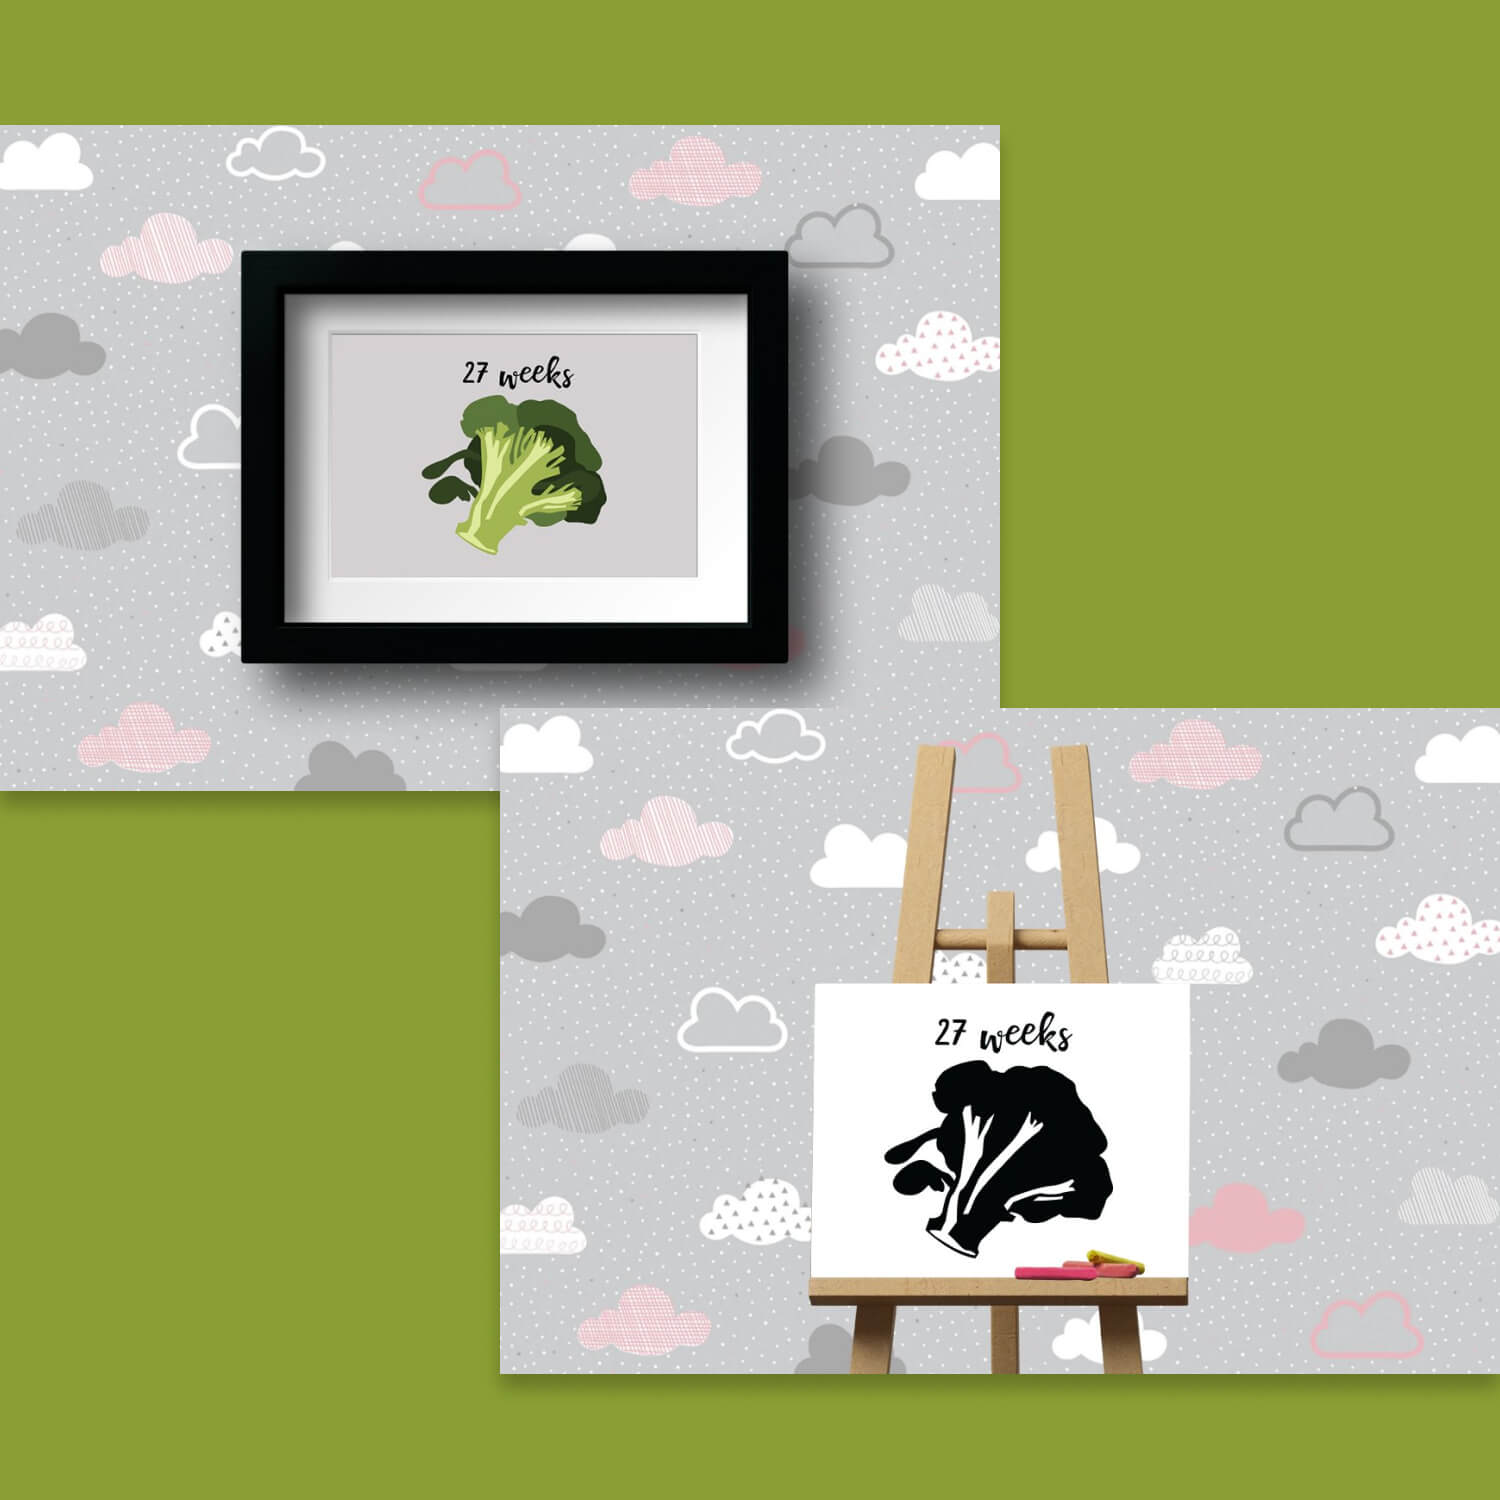 The two pictures show black and white and colored broccoli.